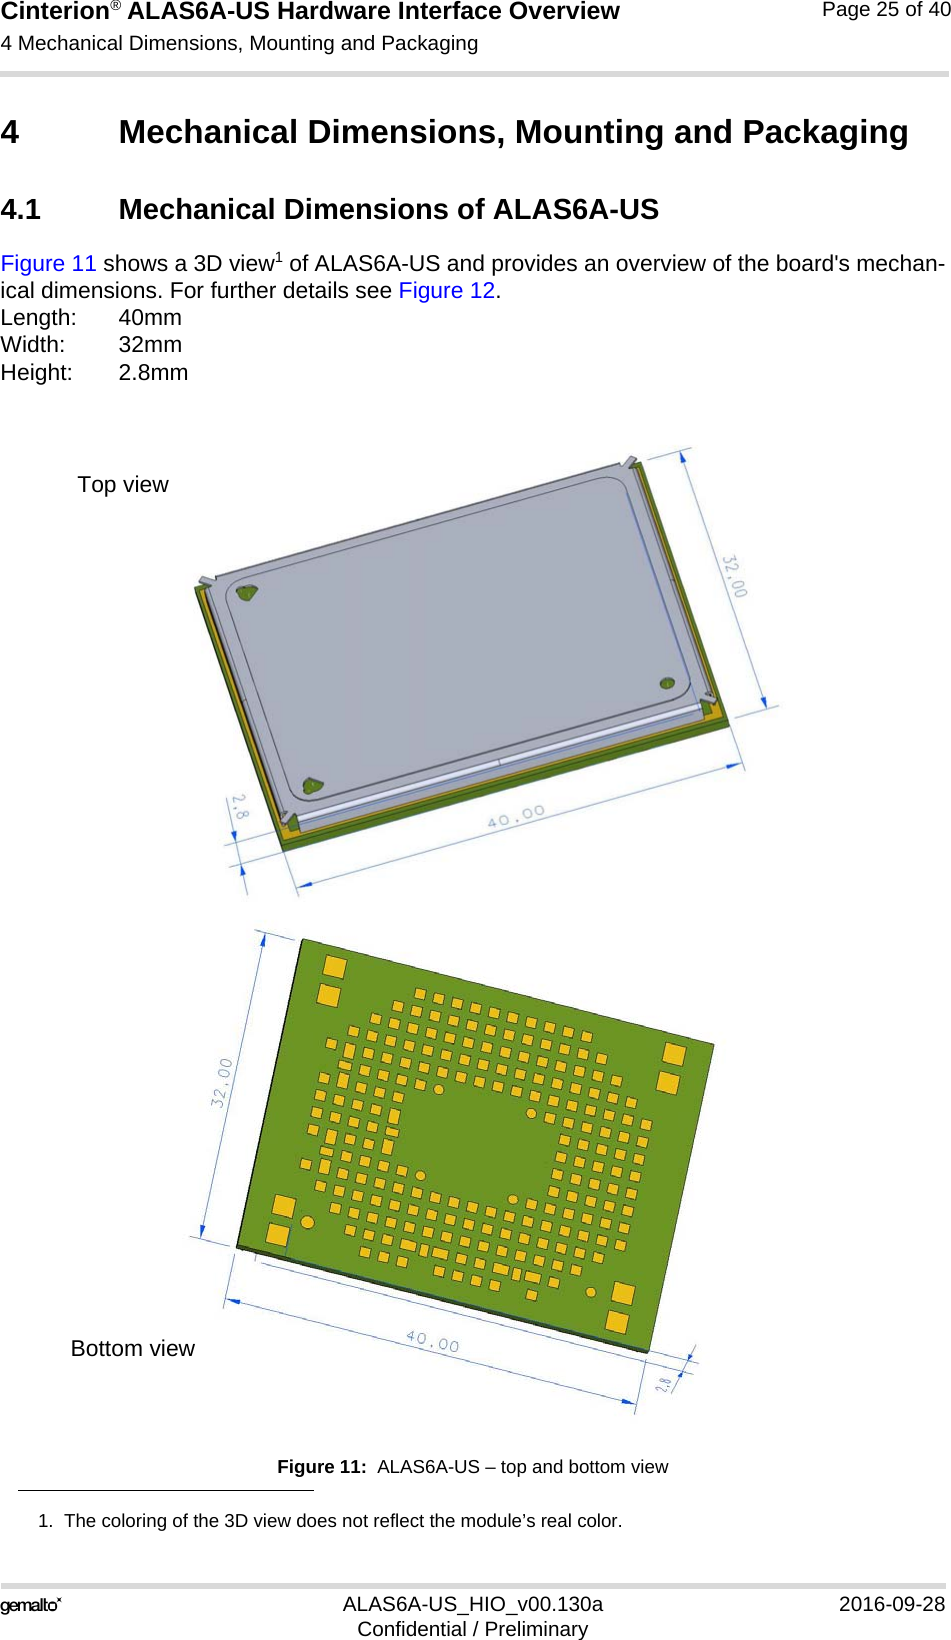 Cinterion® ALAS6A-US Hardware Interface Overview4 Mechanical Dimensions, Mounting and Packaging26ALAS6A-US_HIO_v00.130a 2016-09-28Confidential / PreliminaryPage 25 of 404 Mechanical Dimensions, Mounting and Packaging4.1 Mechanical Dimensions of ALAS6A-USFigure 11 shows a 3D view1 of ALAS6A-US and provides an overview of the board&apos;s mechan-ical dimensions. For further details see Figure 12. Length: 40mmWidth: 32mmHeight: 2.8mmFigure 11:  ALAS6A-US – top and bottom view1.  The coloring of the 3D view does not reflect the module’s real color.Top viewBottom view